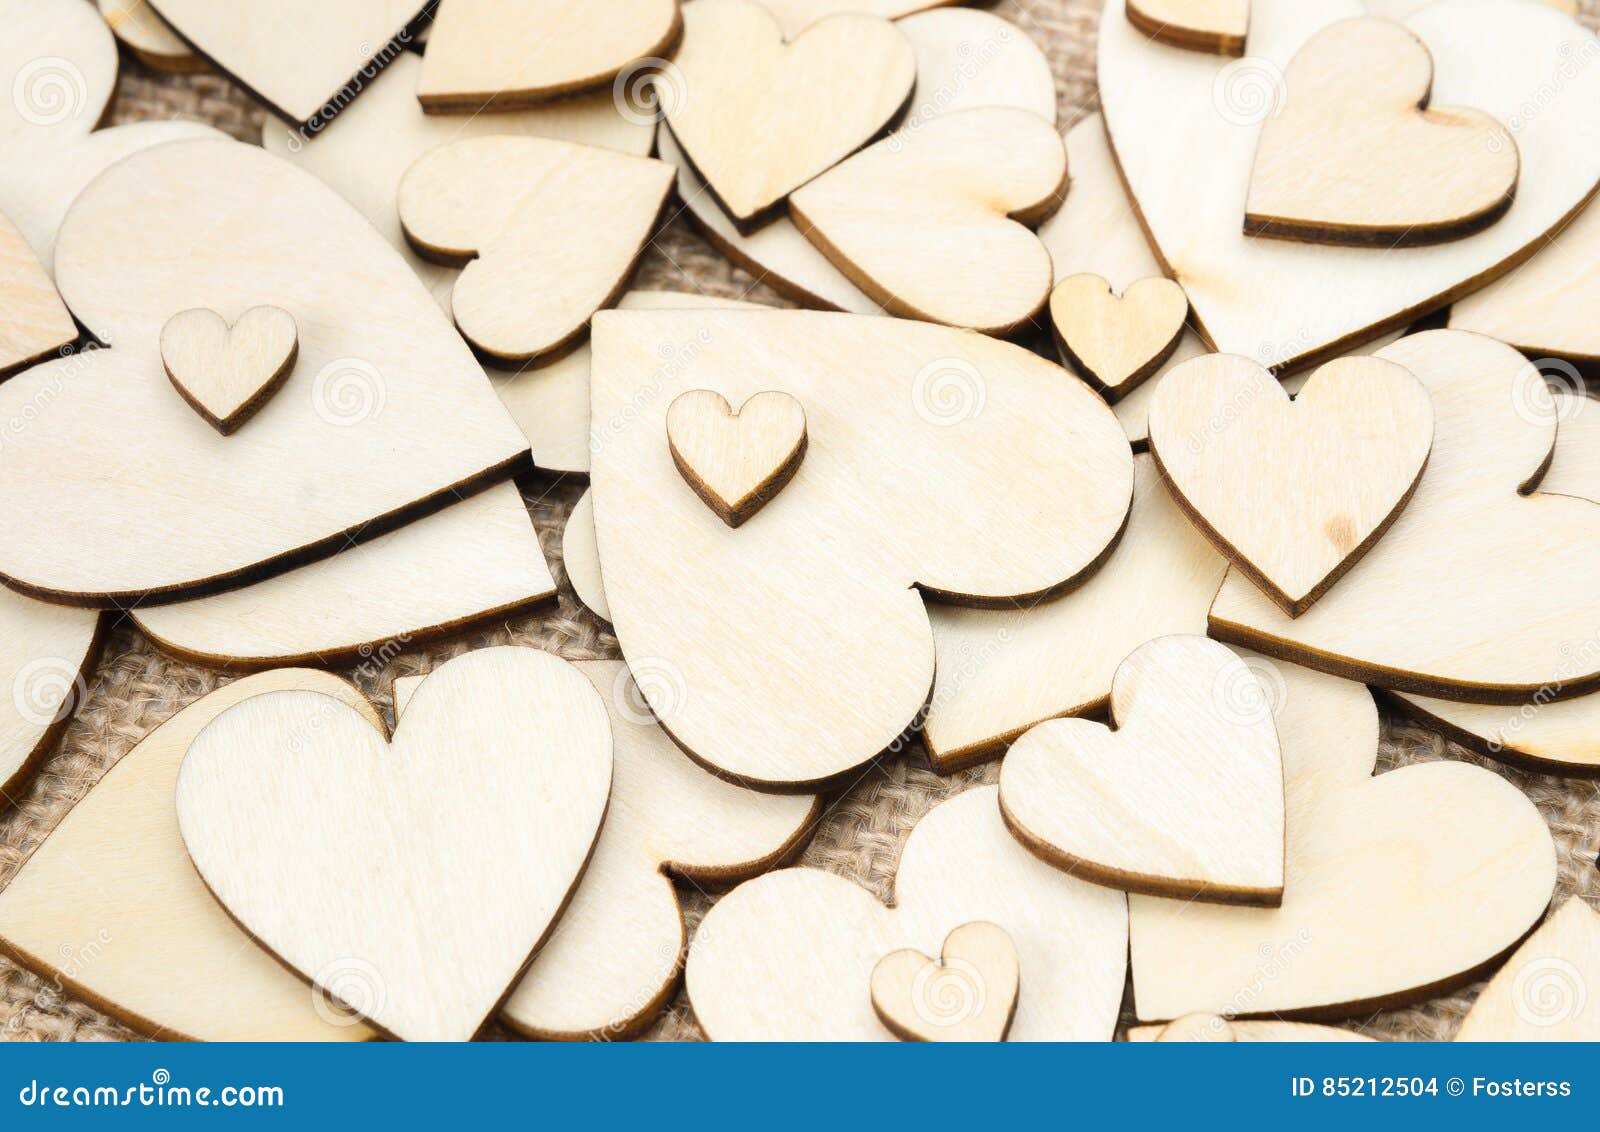 wood hearts on hessian texture background, valentine background